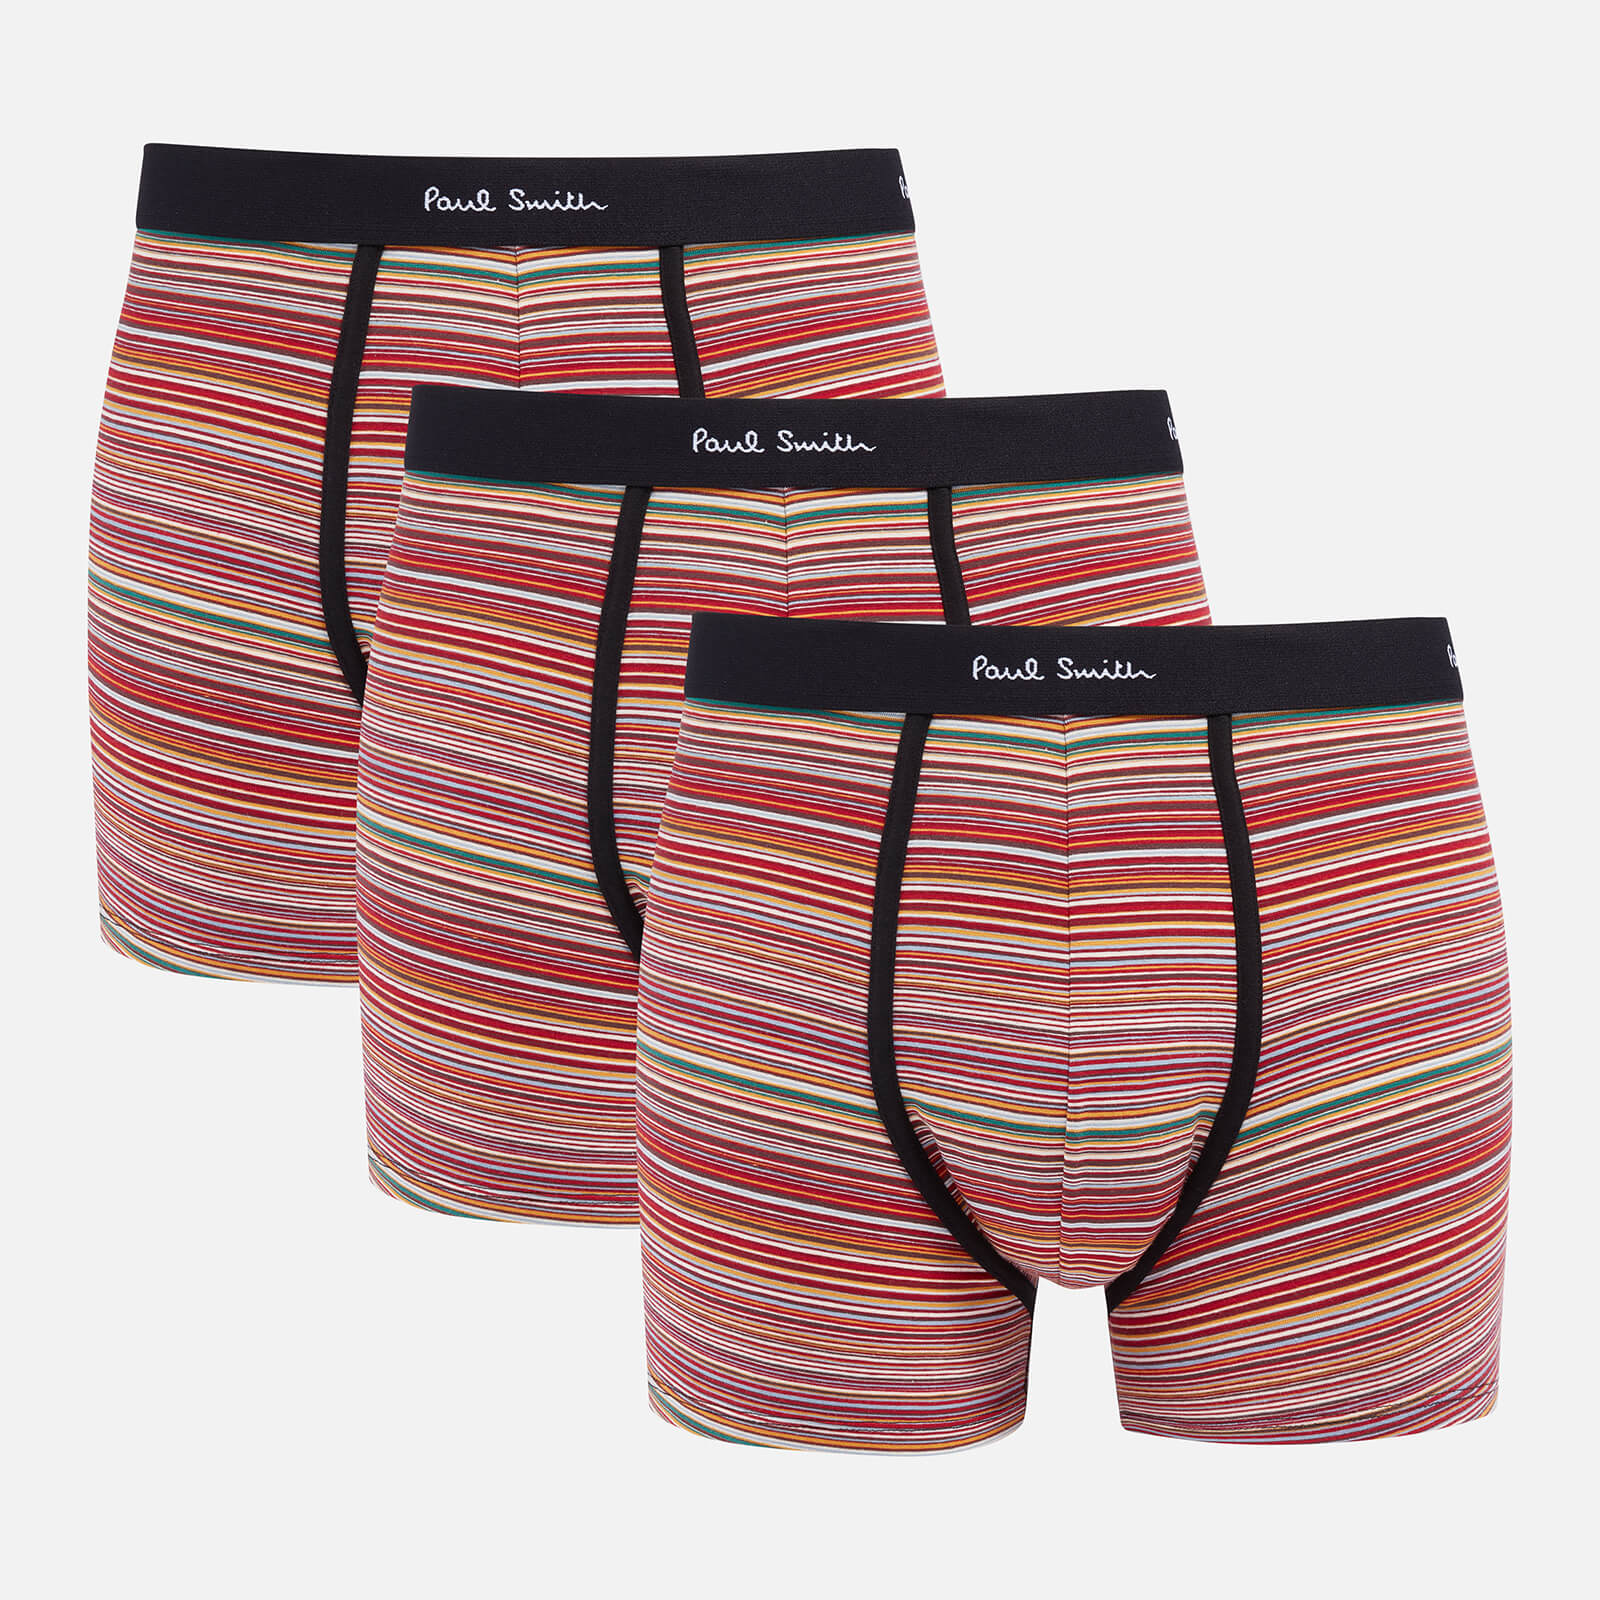 PS Paul Smith Three-Pack Striped Organic Cotton-Blend Boxer Shorts product